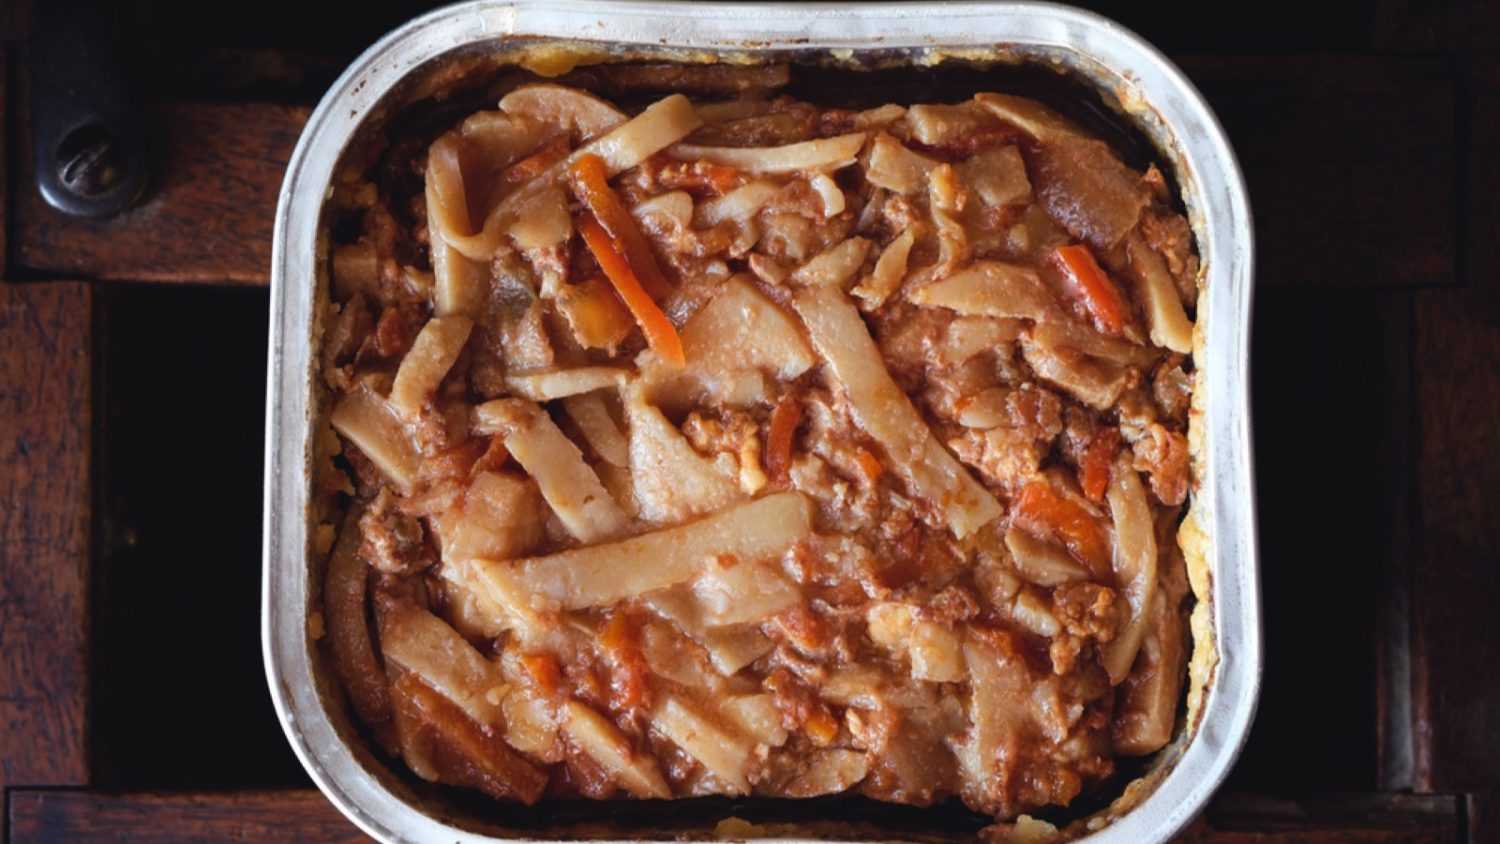 Camping Out Casserole Recipe from H-E-B